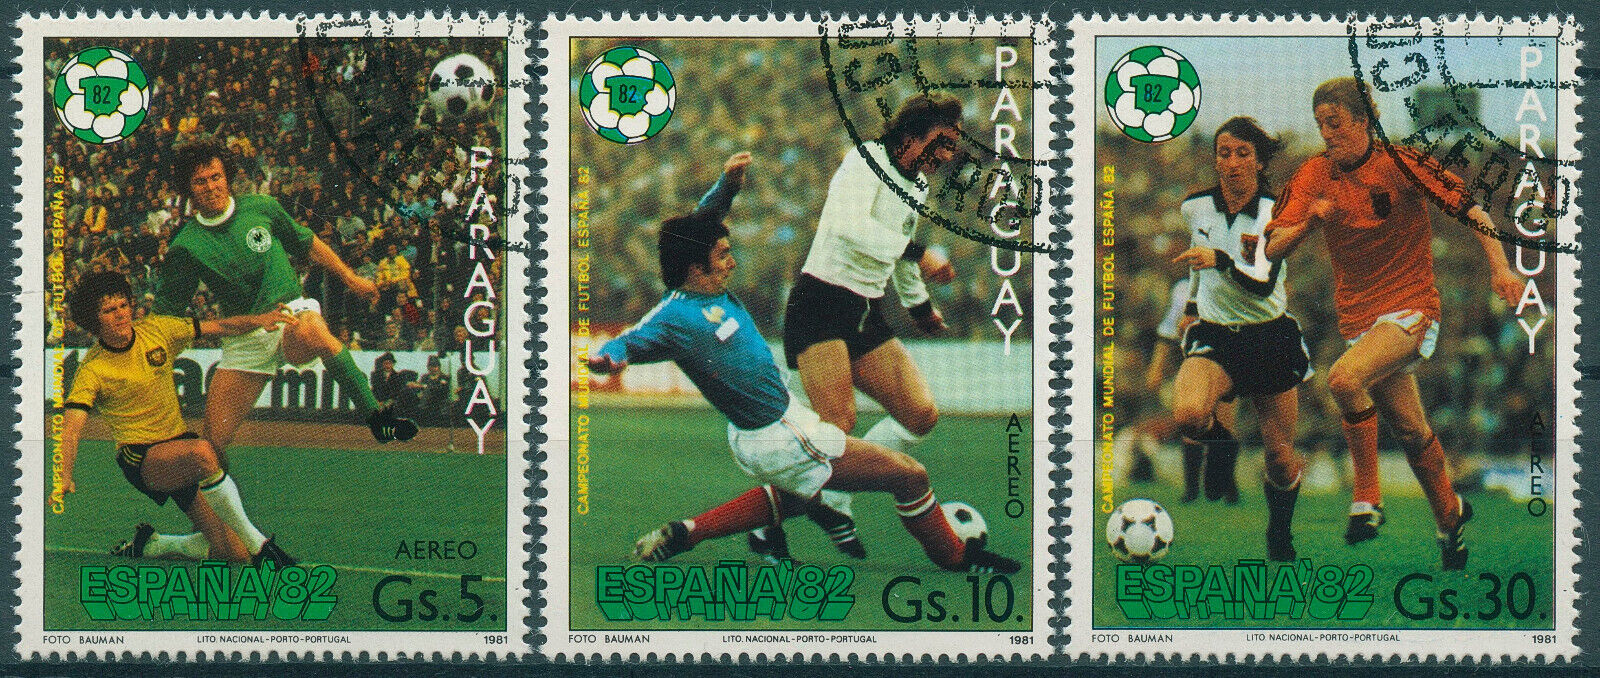 Paraguay 1981 CTO Sports Stamps Football World Cup Spain '82 Soccer 3v Set